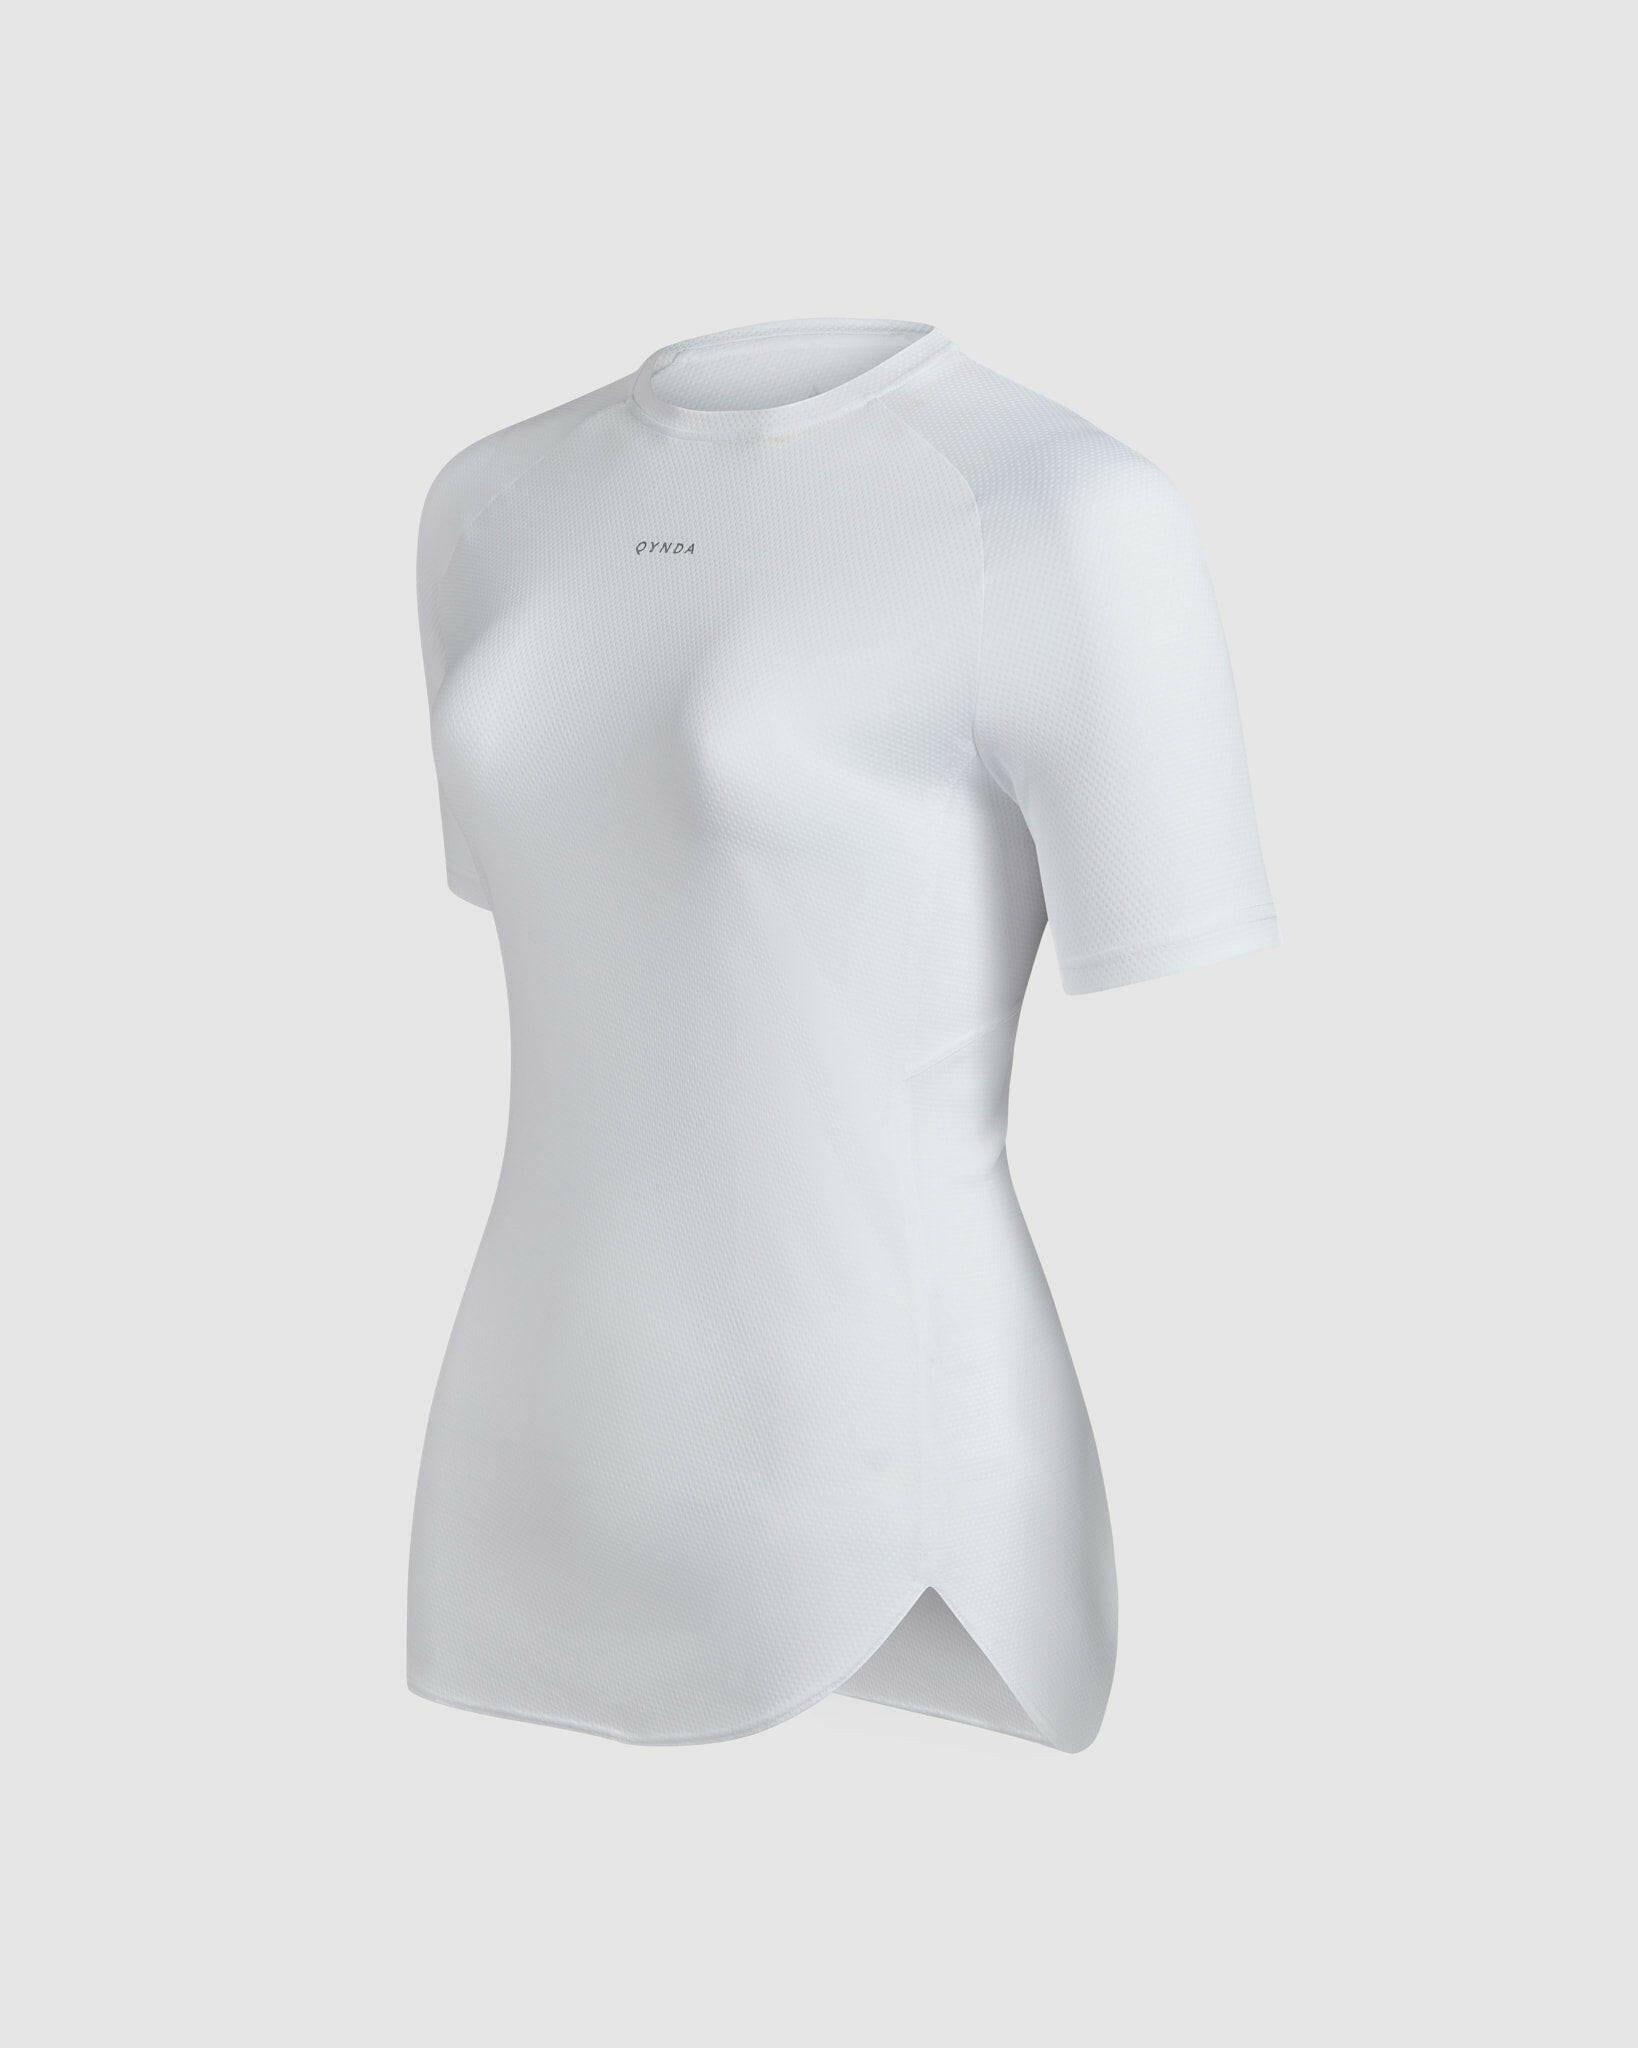 A white, short-sleeved, BREATHE T-SHIRT by qynda designed for running sports and optimized for breathability is displayed on a mannequin torso against a neutral background.